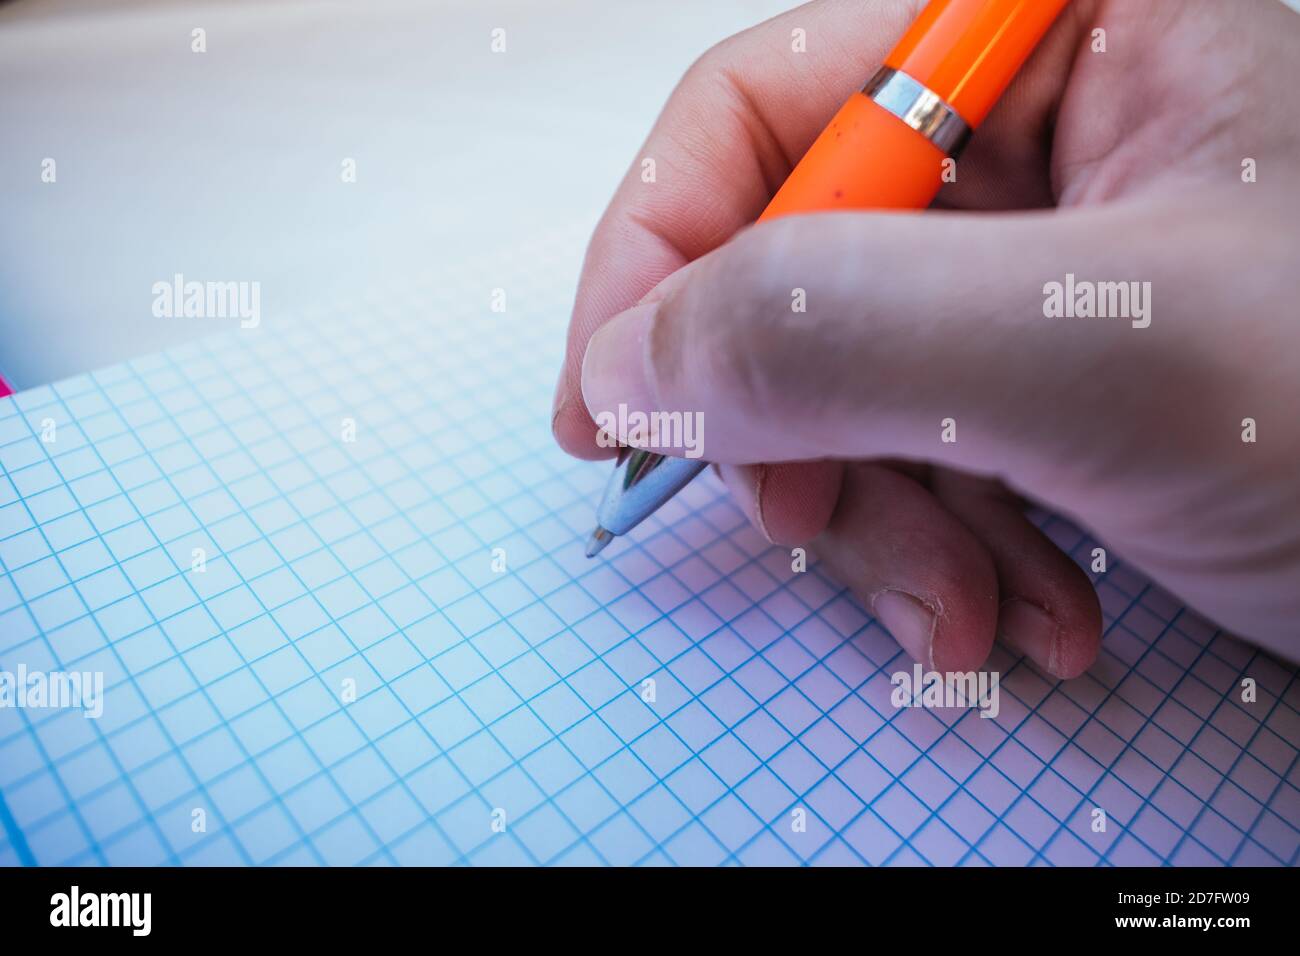 close-up of a hand writing in a notebook Stock Photo